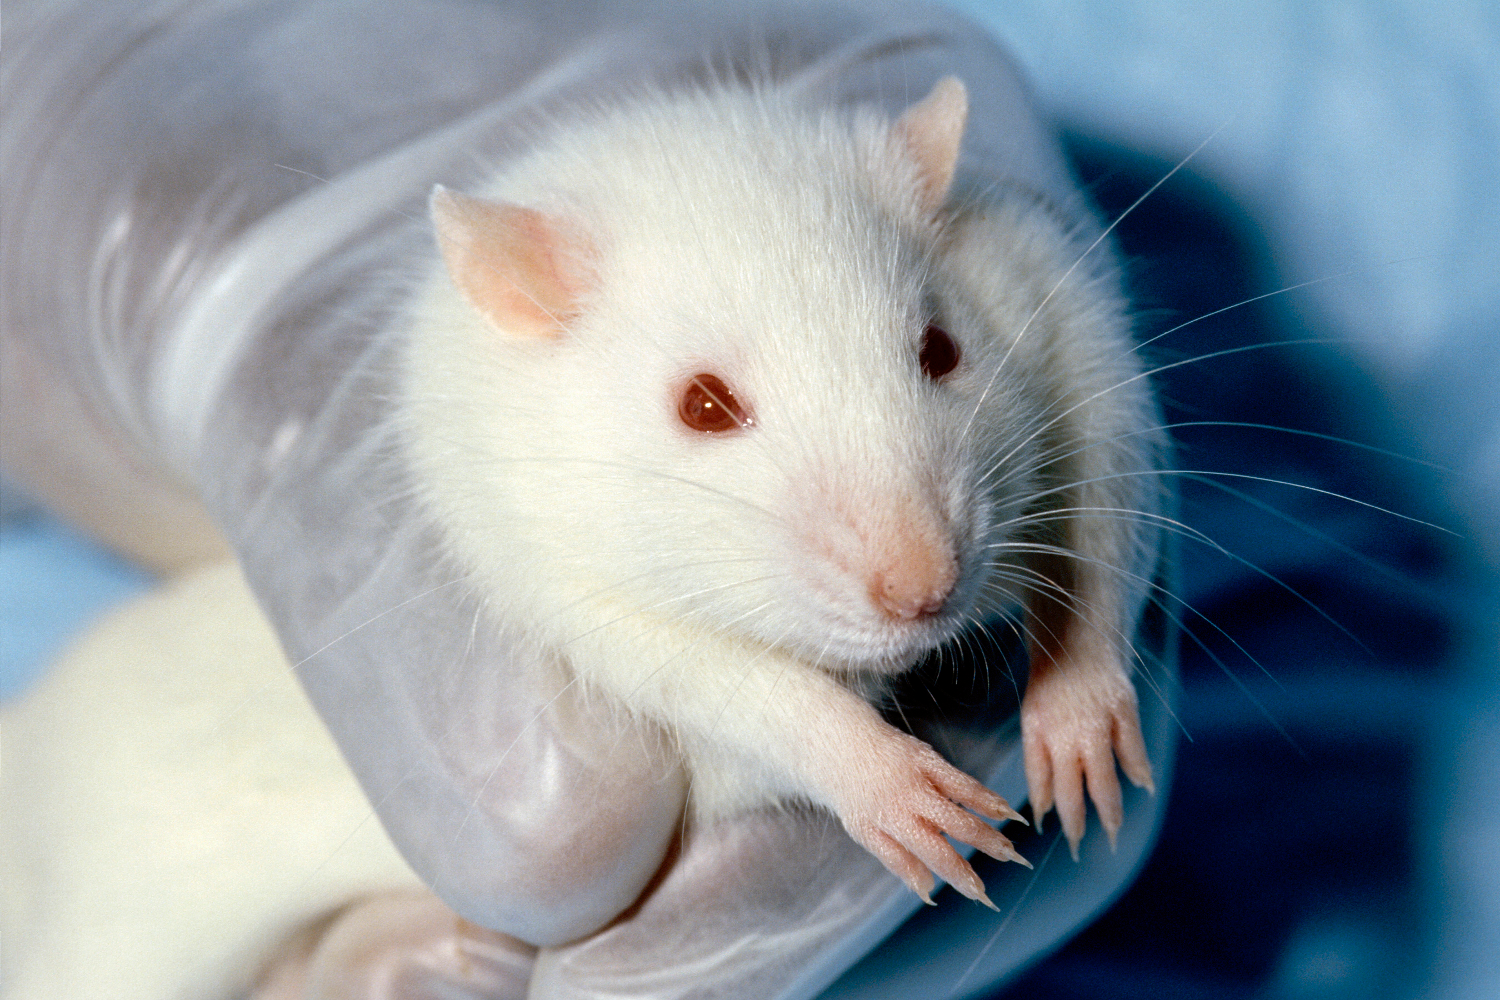 Scientists Want to Implant Mini Human Brains in Animals | Digital Trends